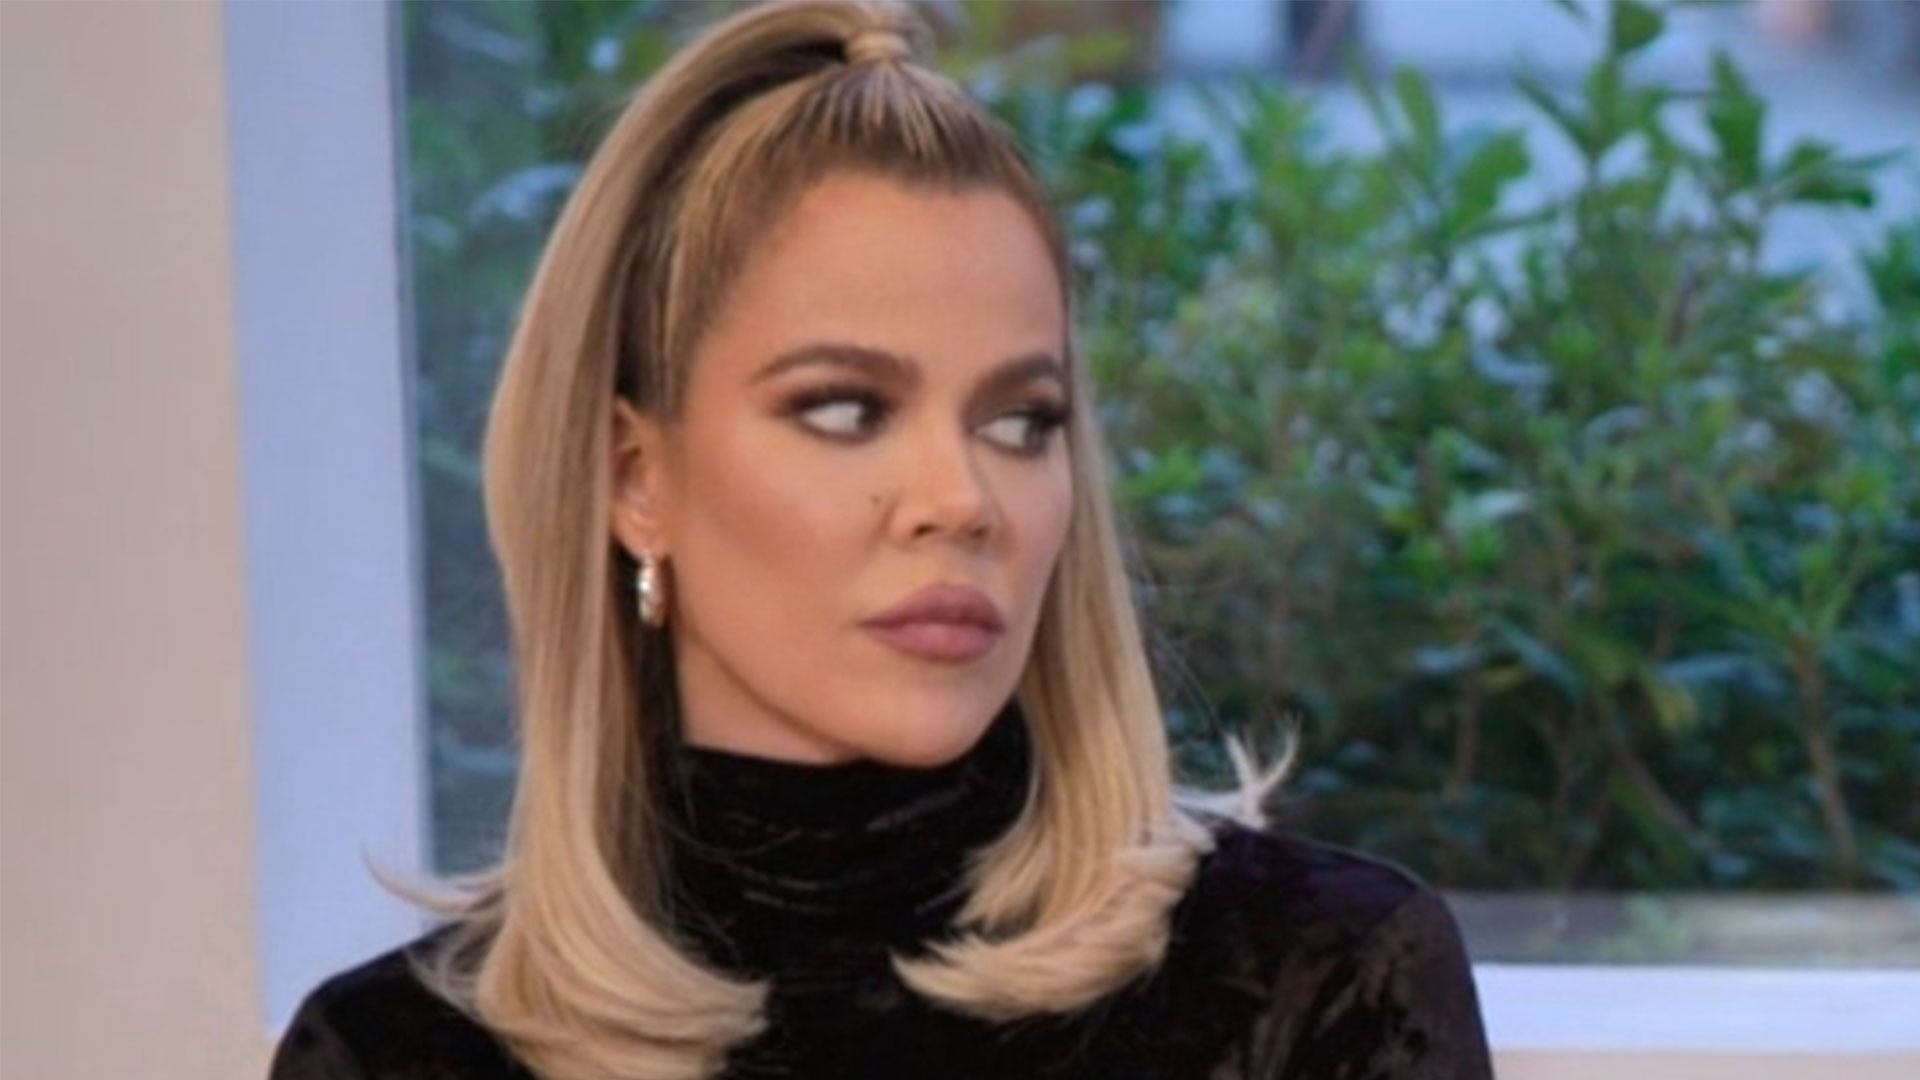 Khloe Kardashian shares cryptic post about 'integrity' & 'moral compass' after Tristan Thompson's love child scandal